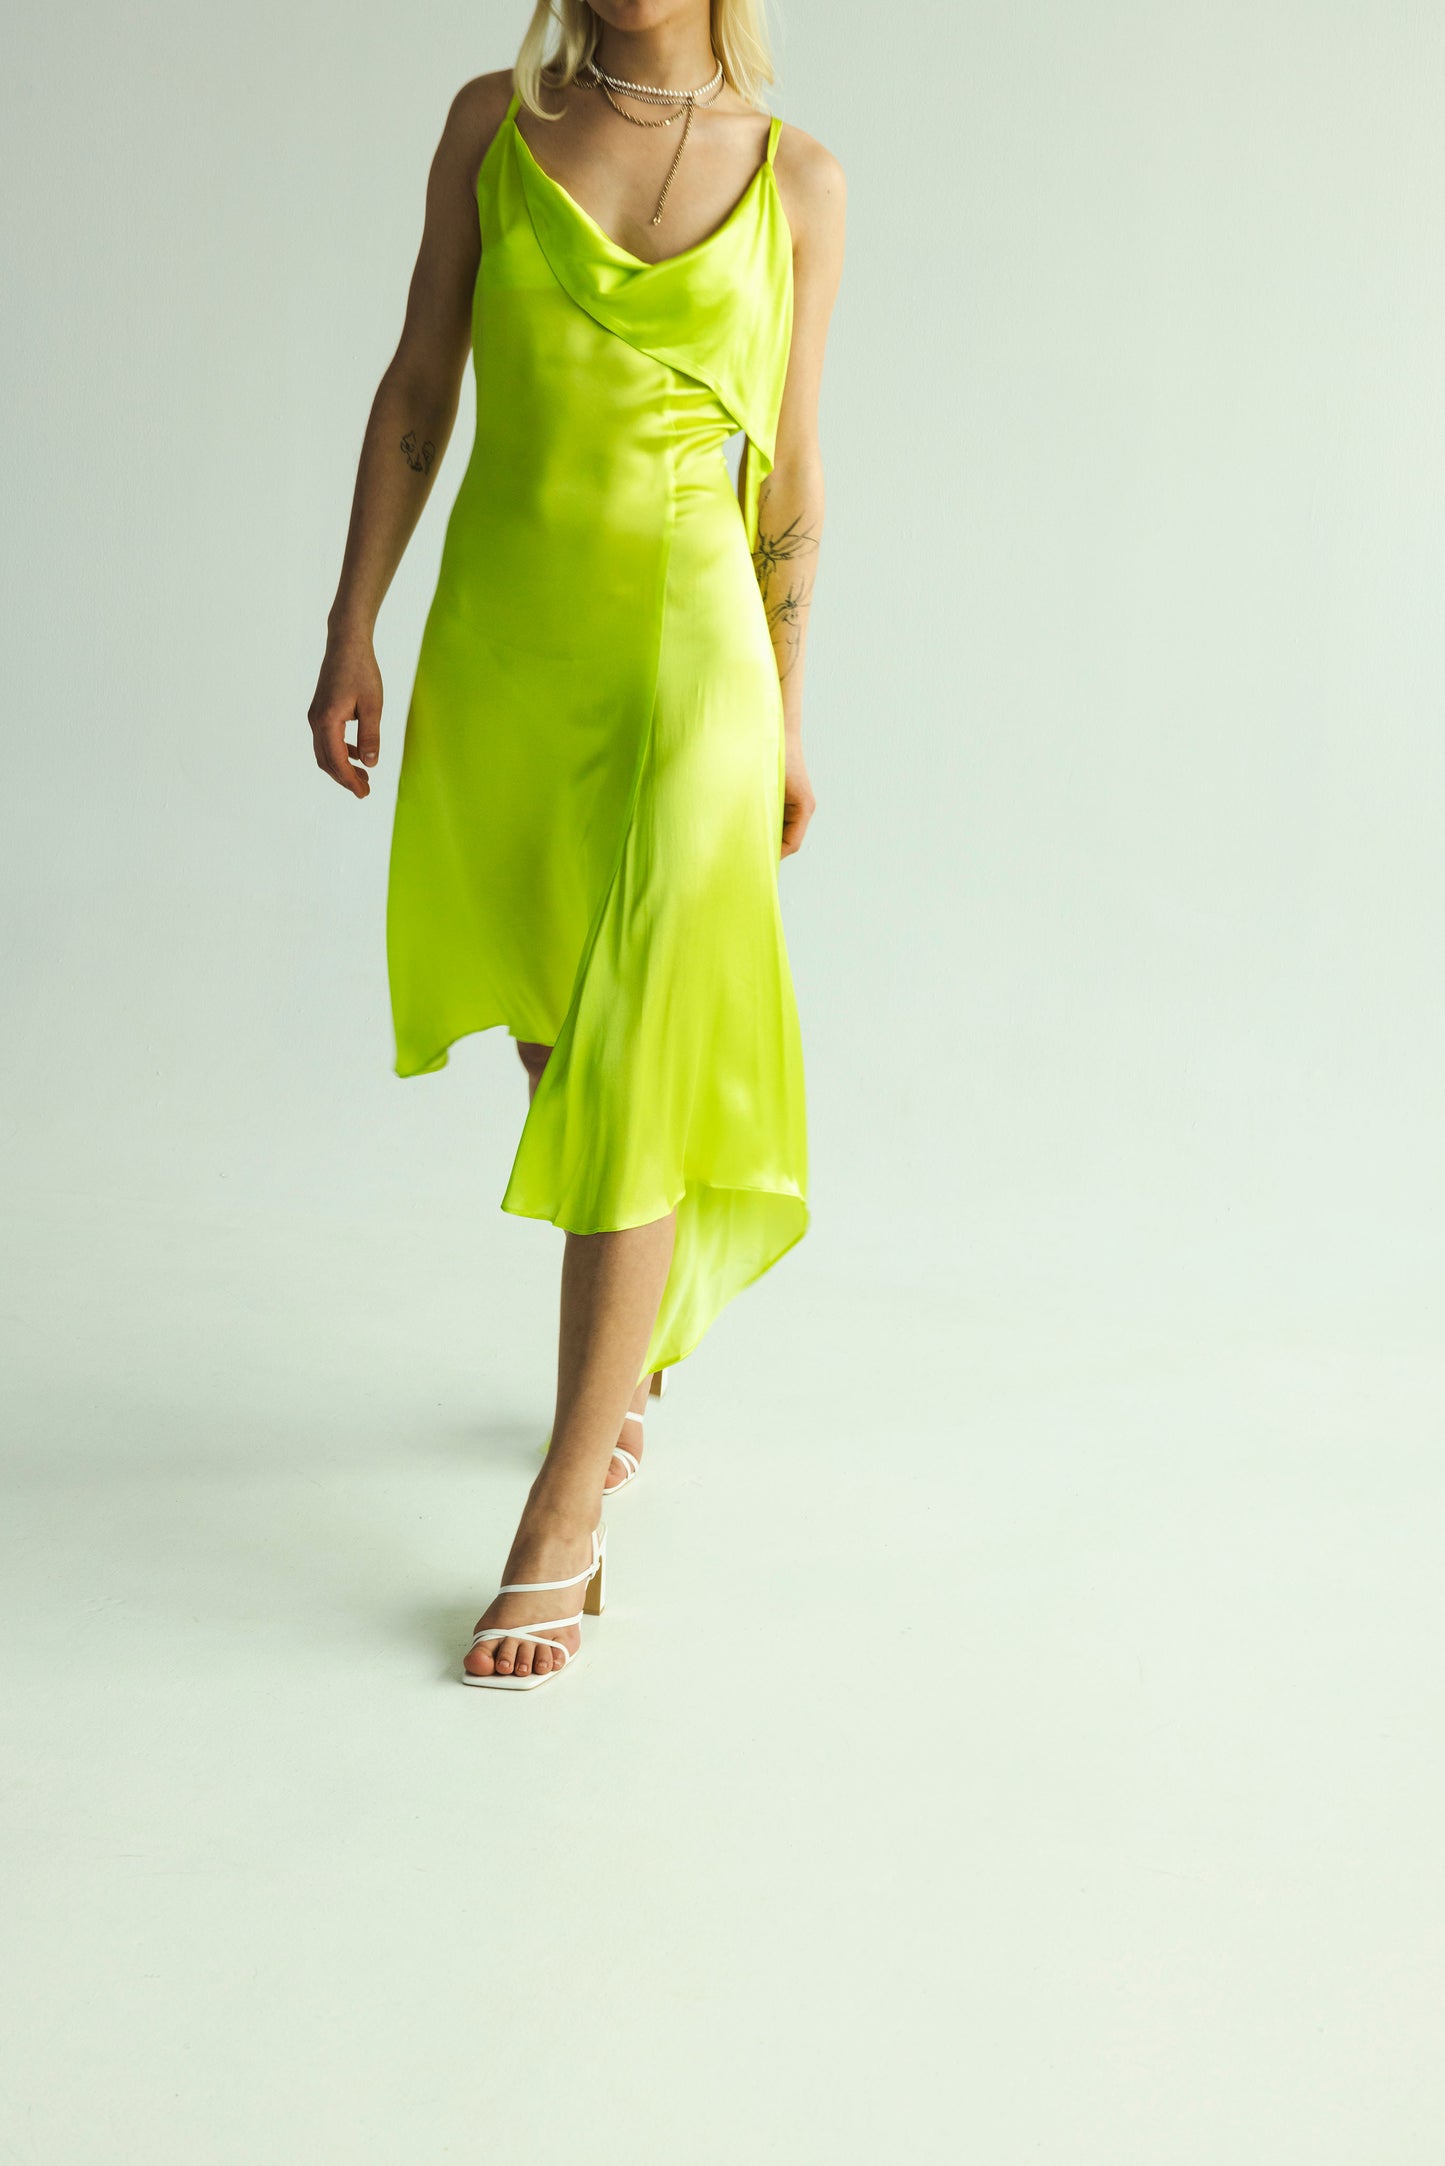 The Flared Dress in Lime green